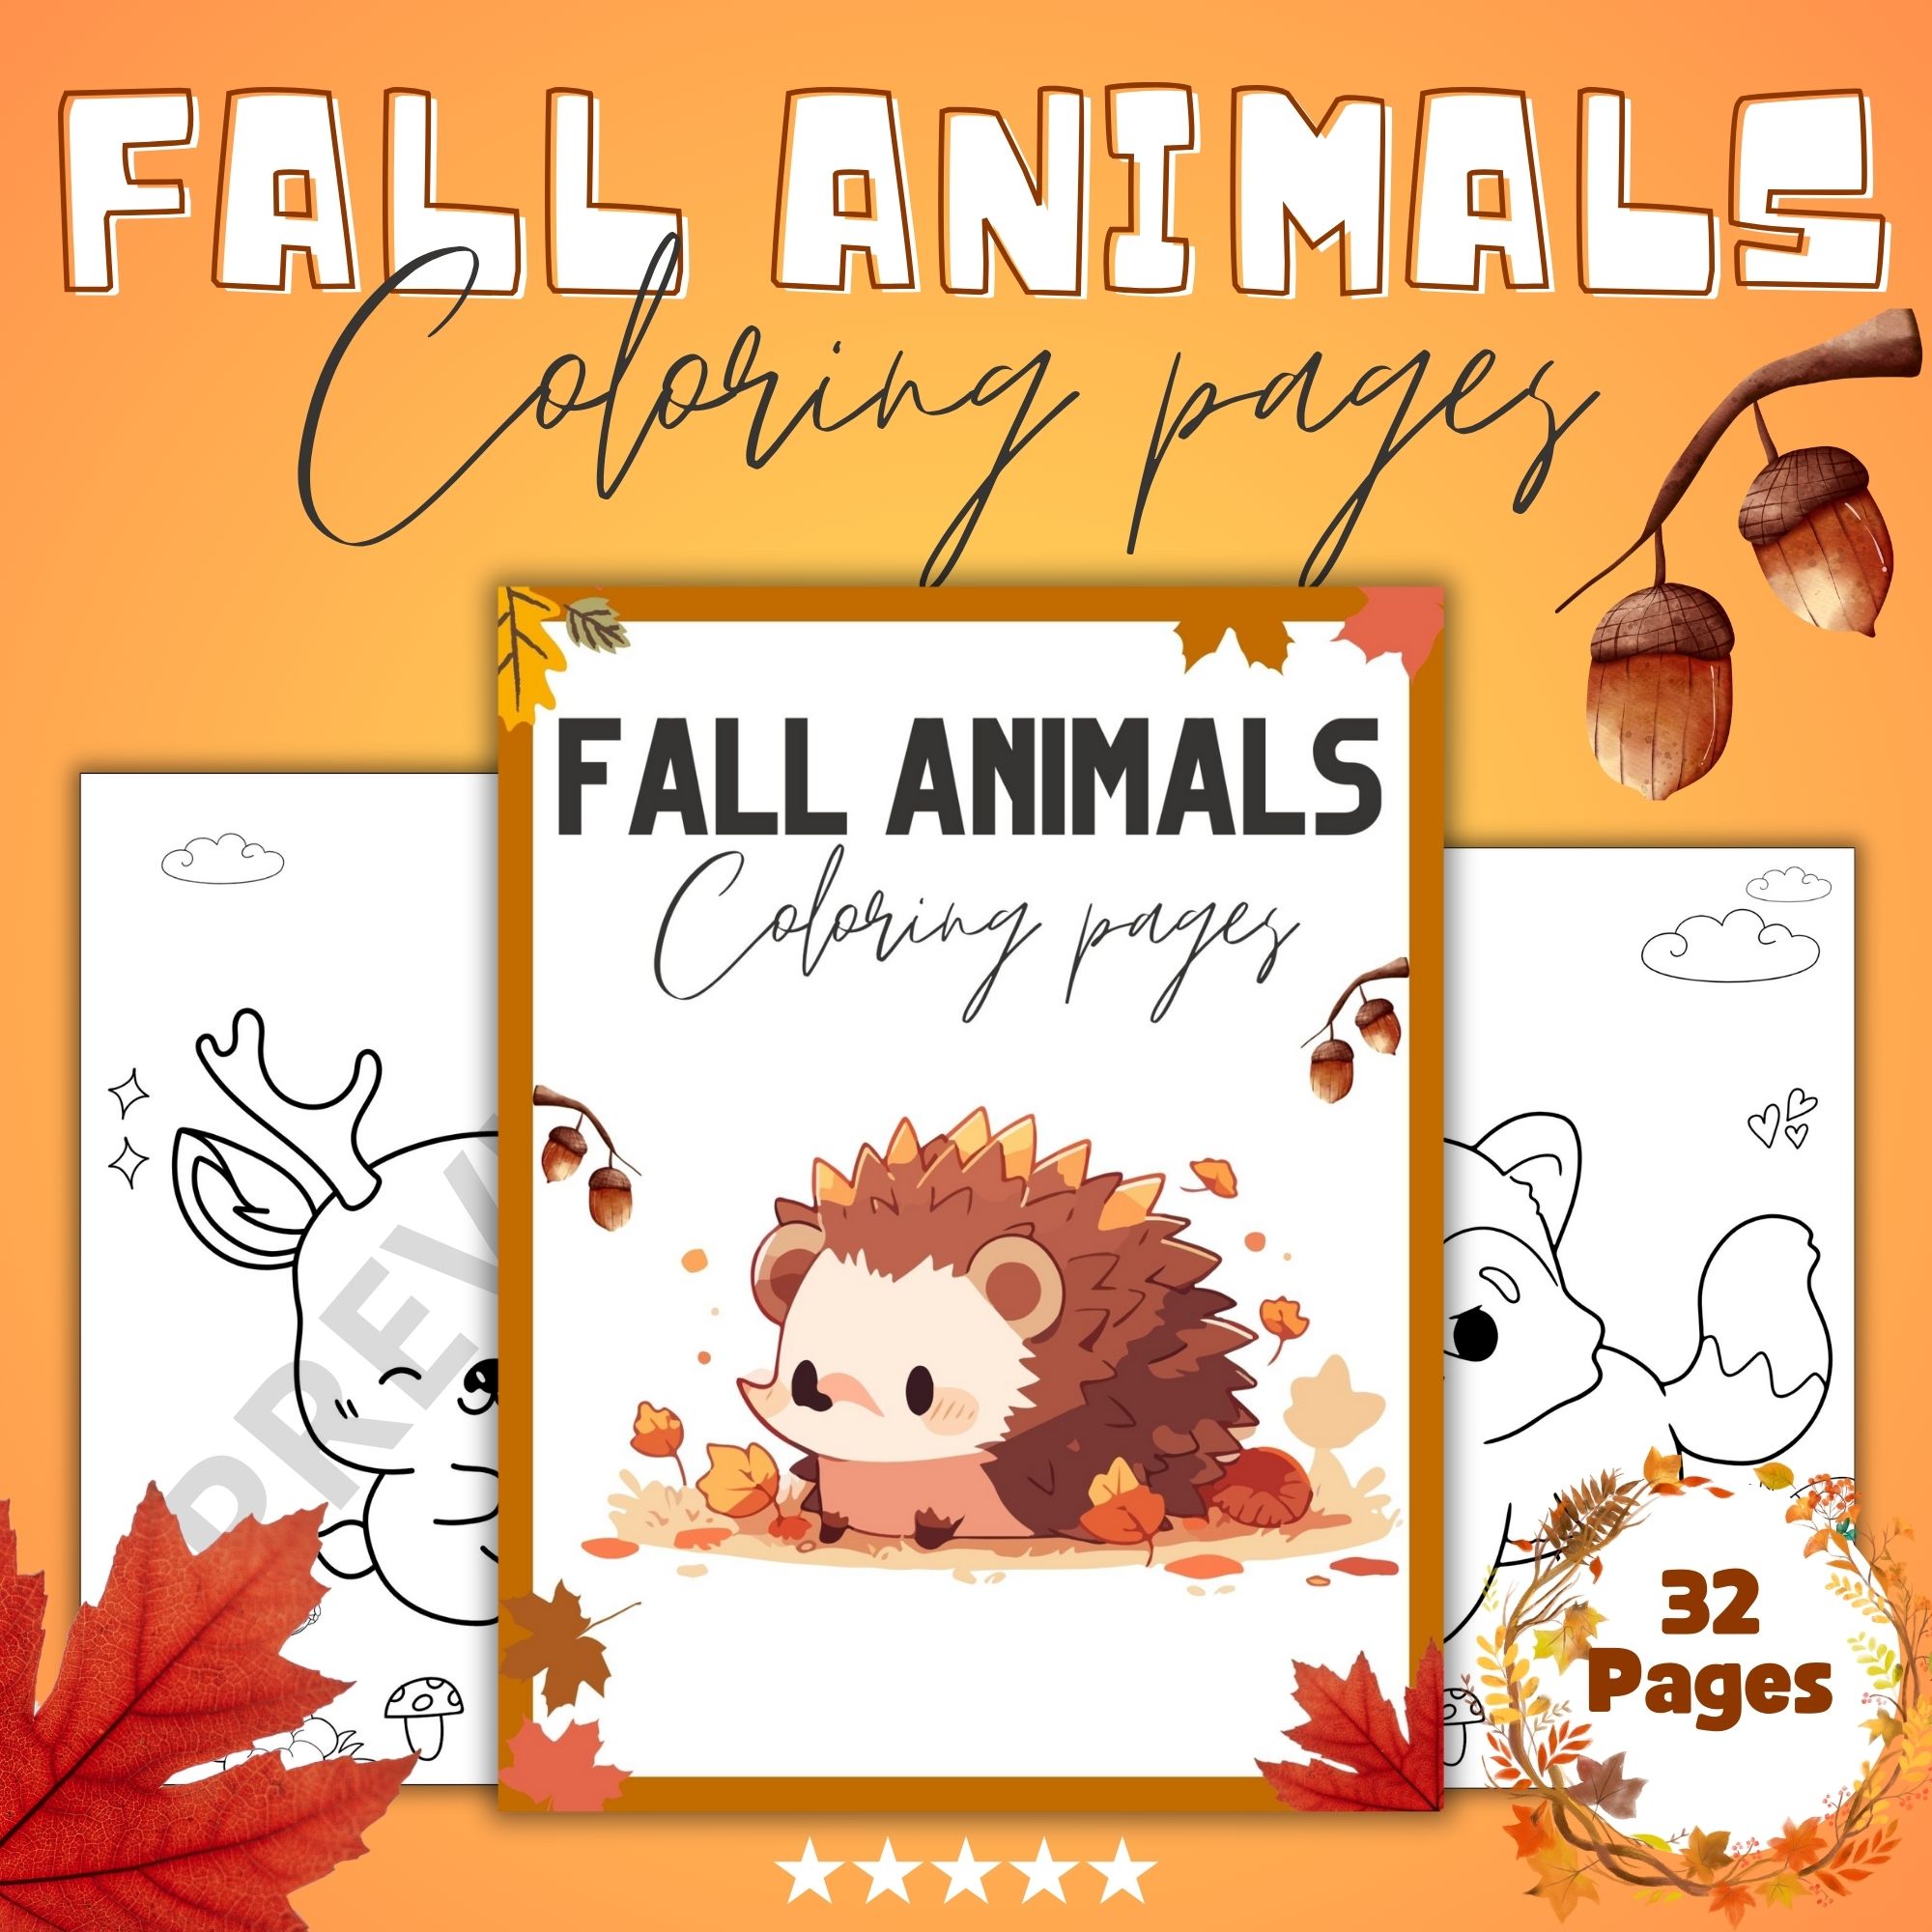 Printable fall animals coloring pages sheets ultimate autumn season activities made by teachers